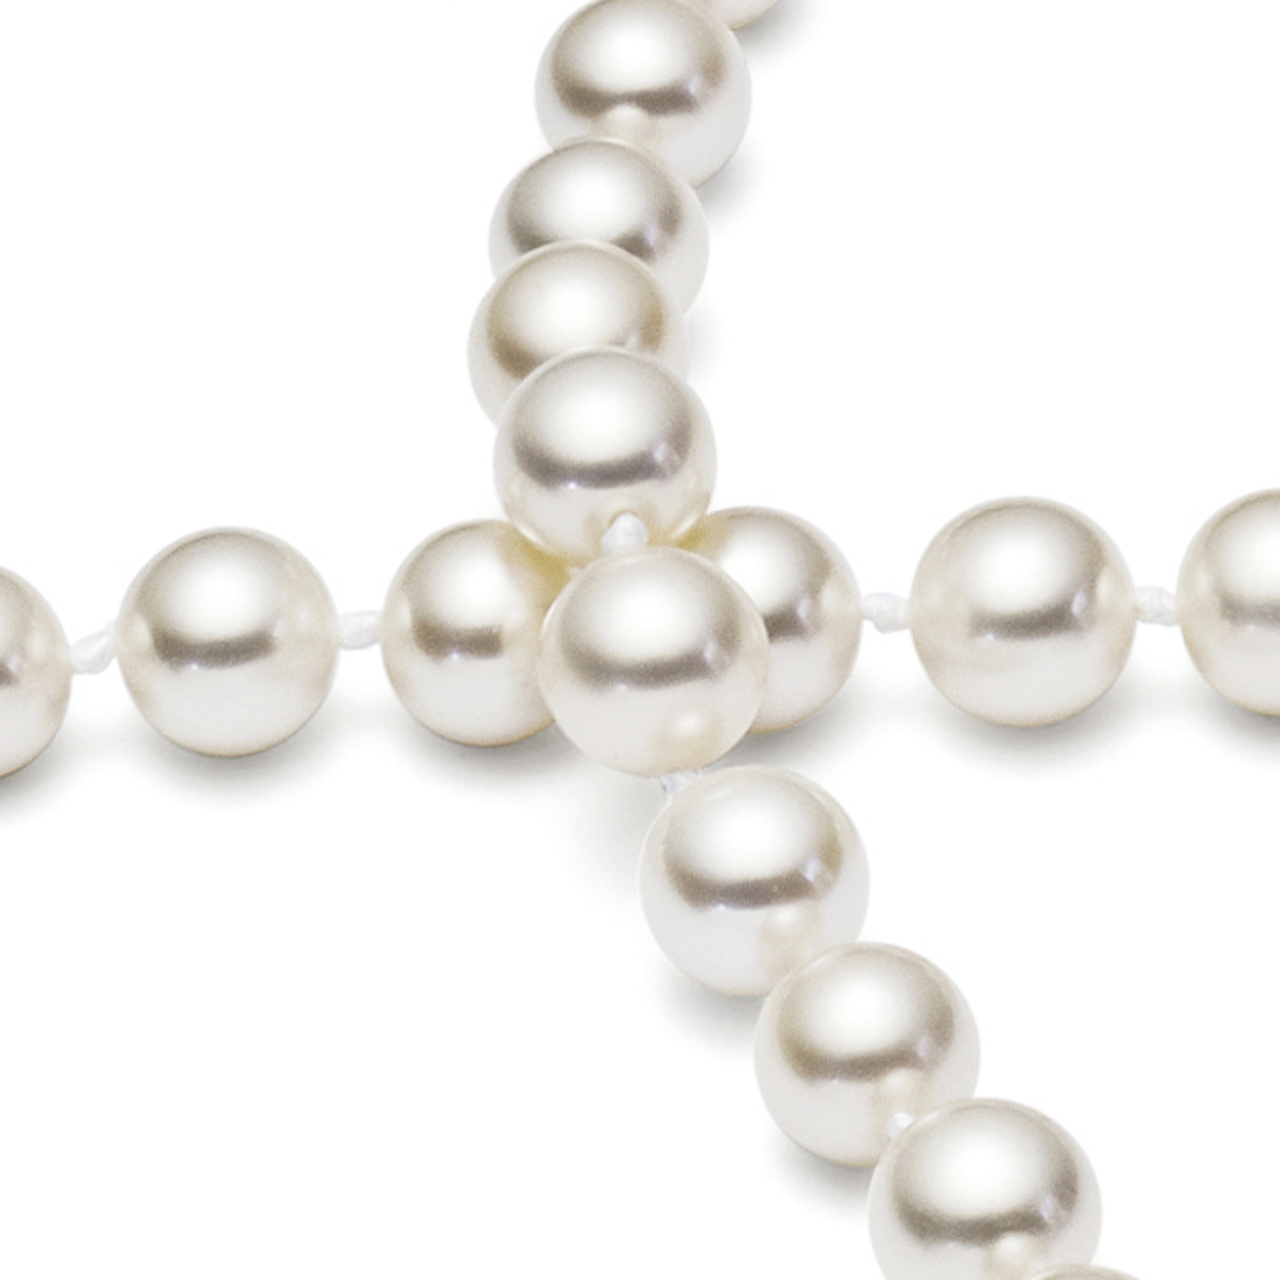 The Pearl Source Real Pearl Necklace for Women with AAA+ Quality Round White Freshwater Genuine Cultured Pearls | 18 inch Pearl Strand with 14K Gold